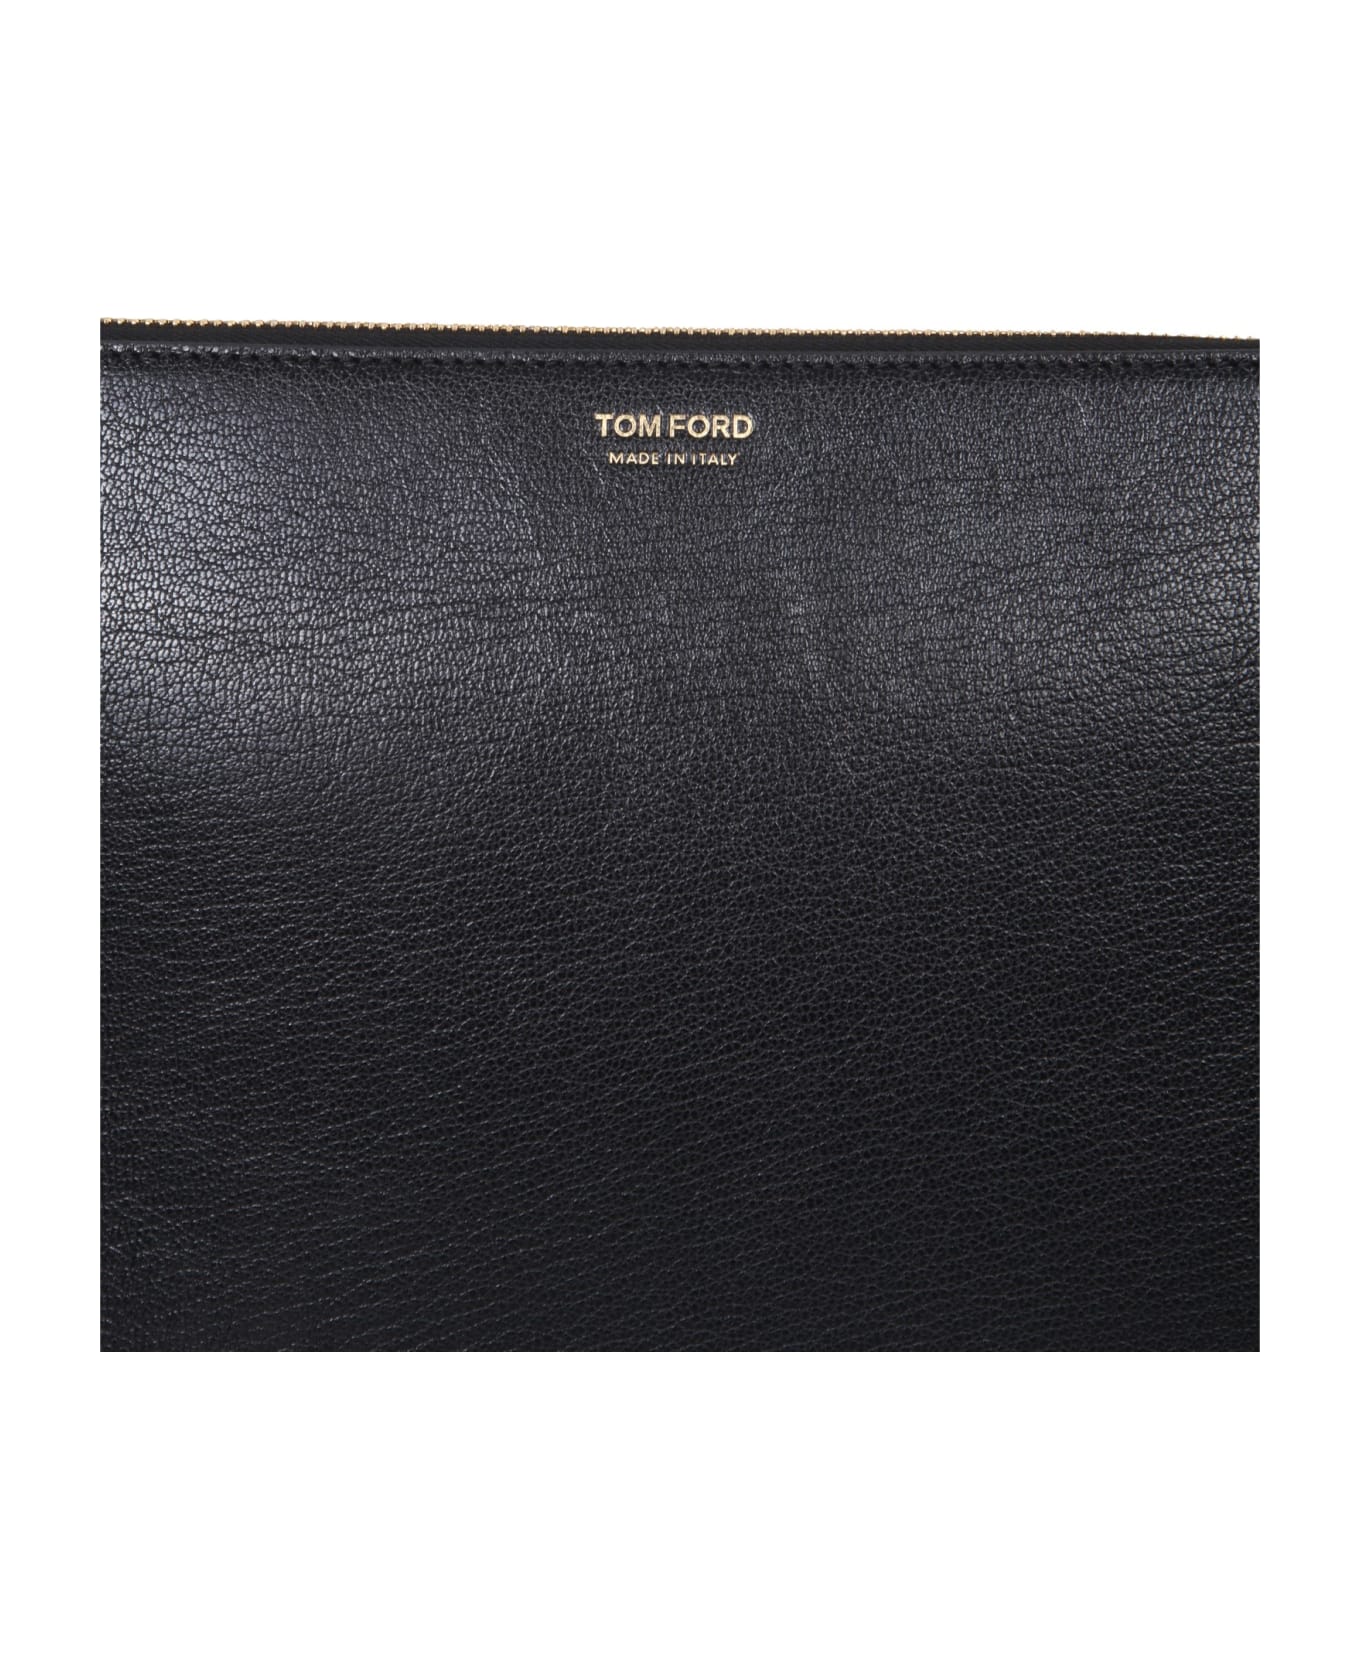 Tom Ford Flat Leather Pouch - NERO